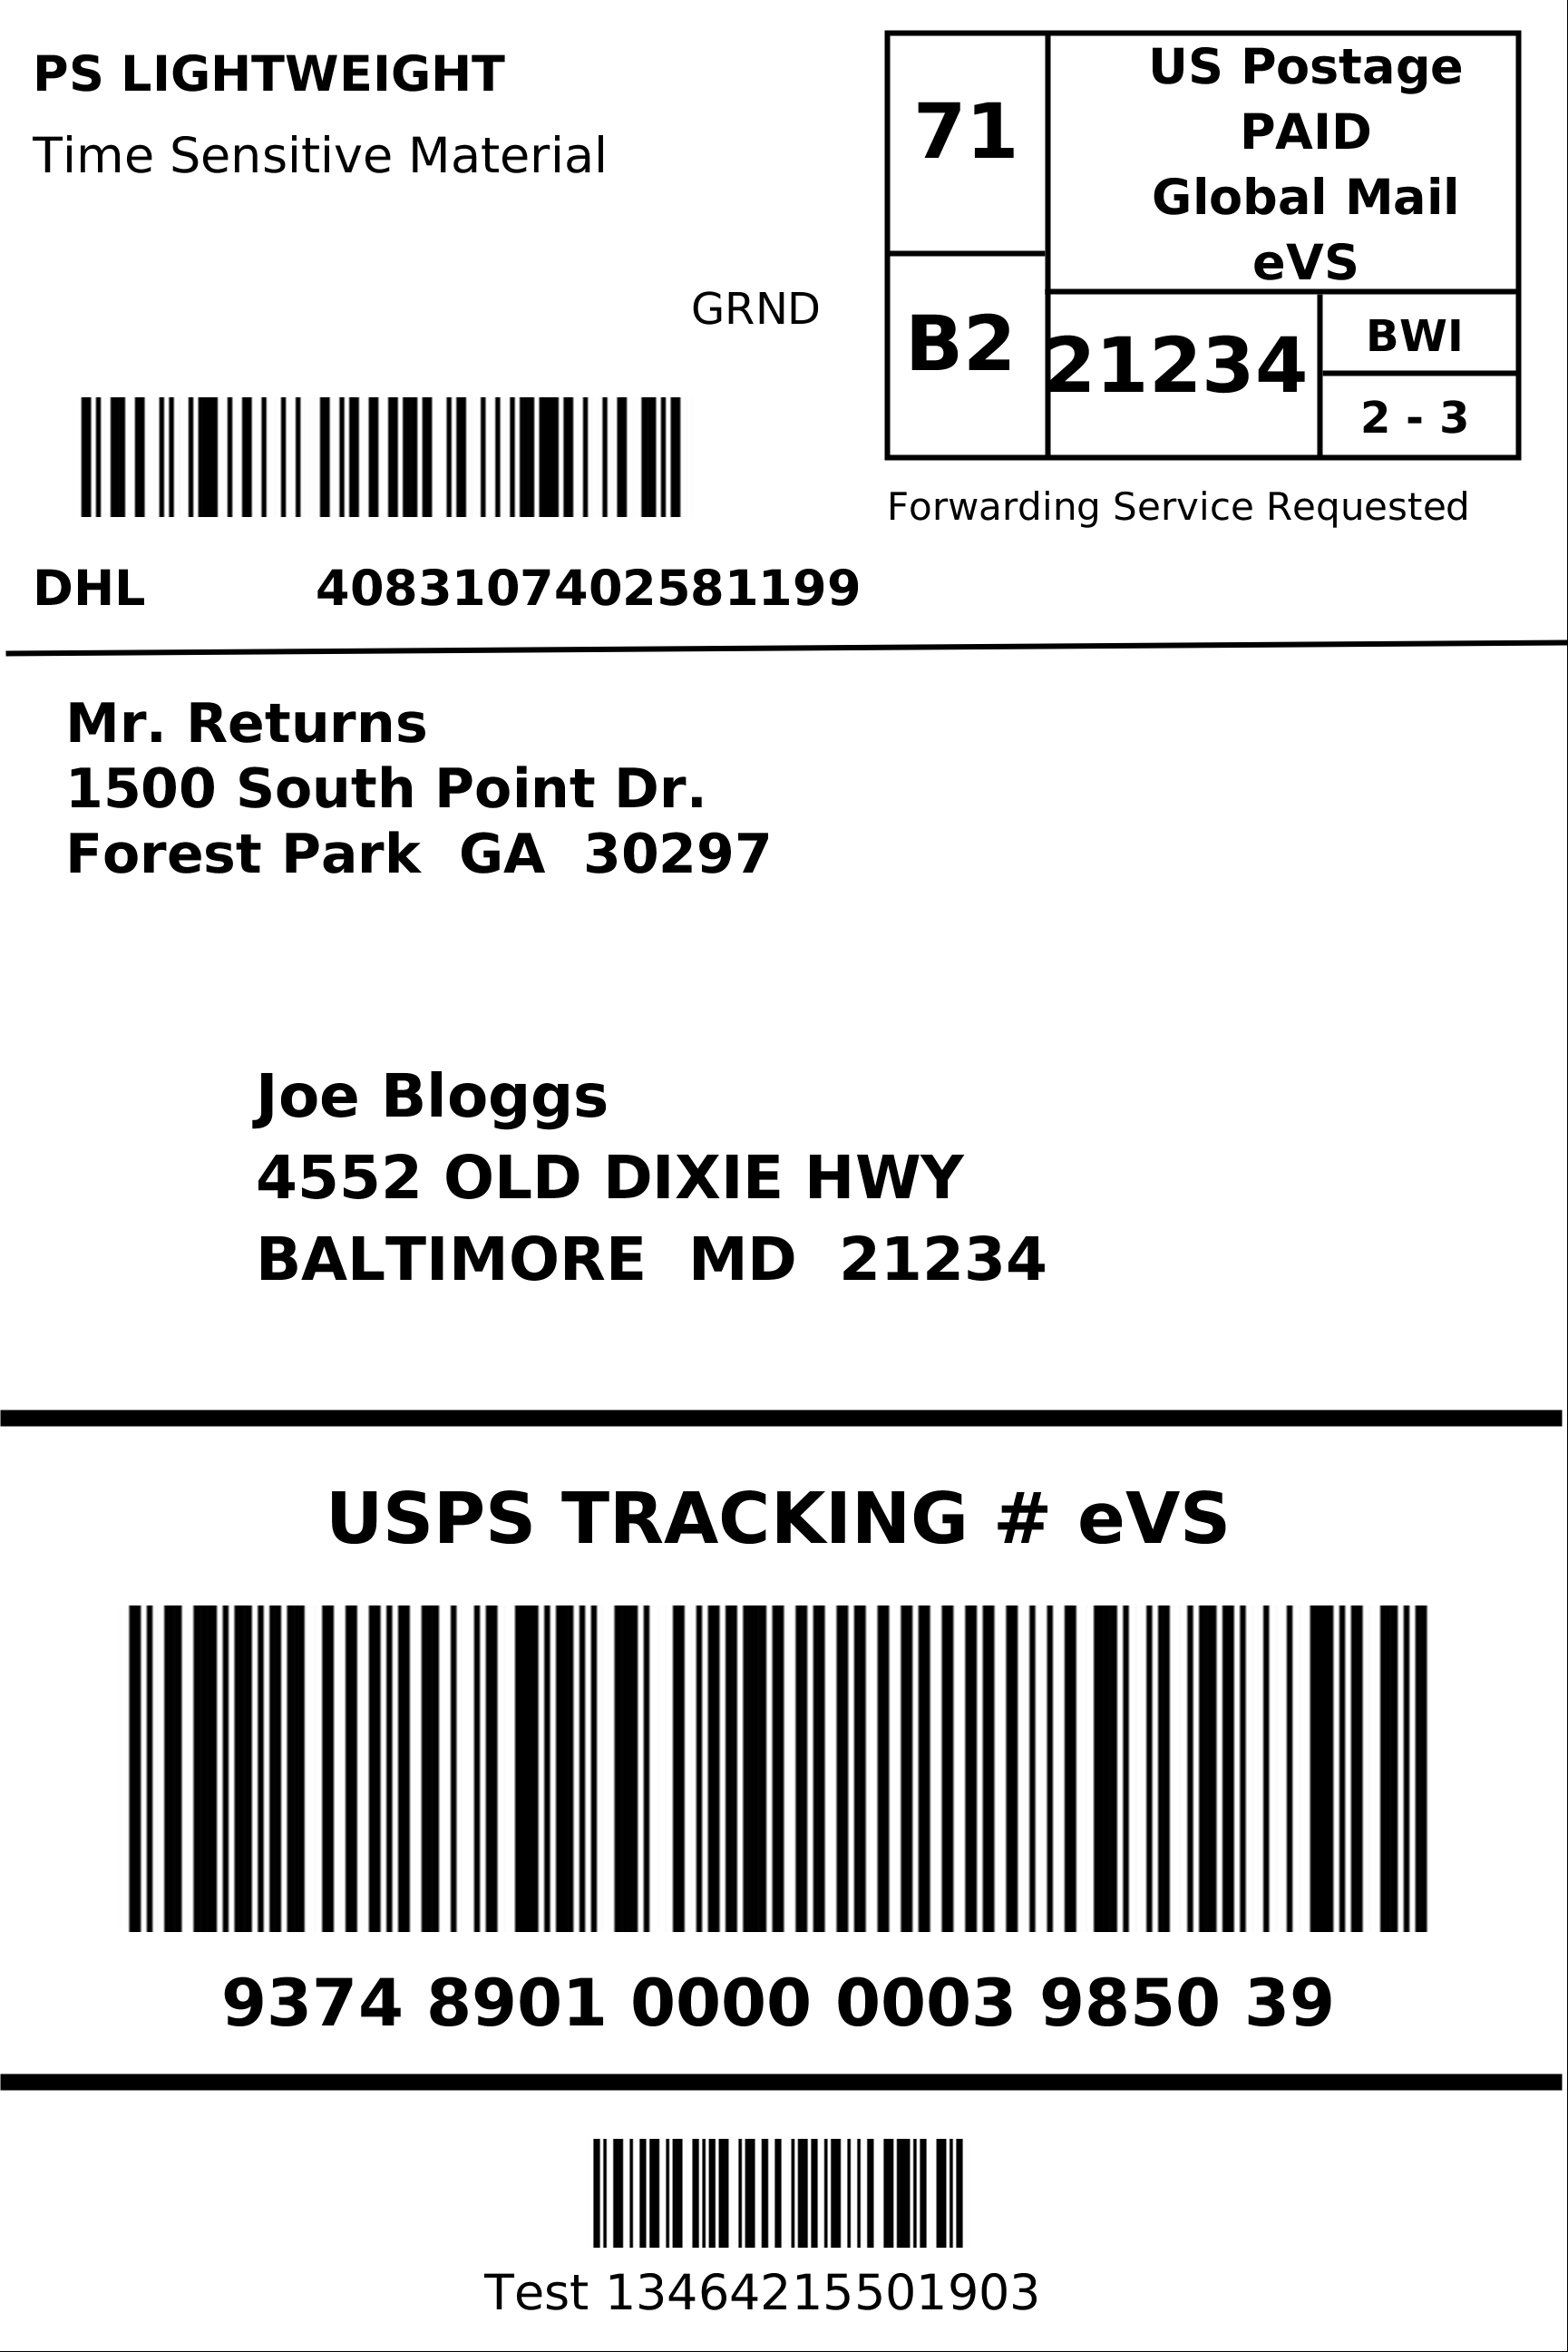 Return Shipping Label Example